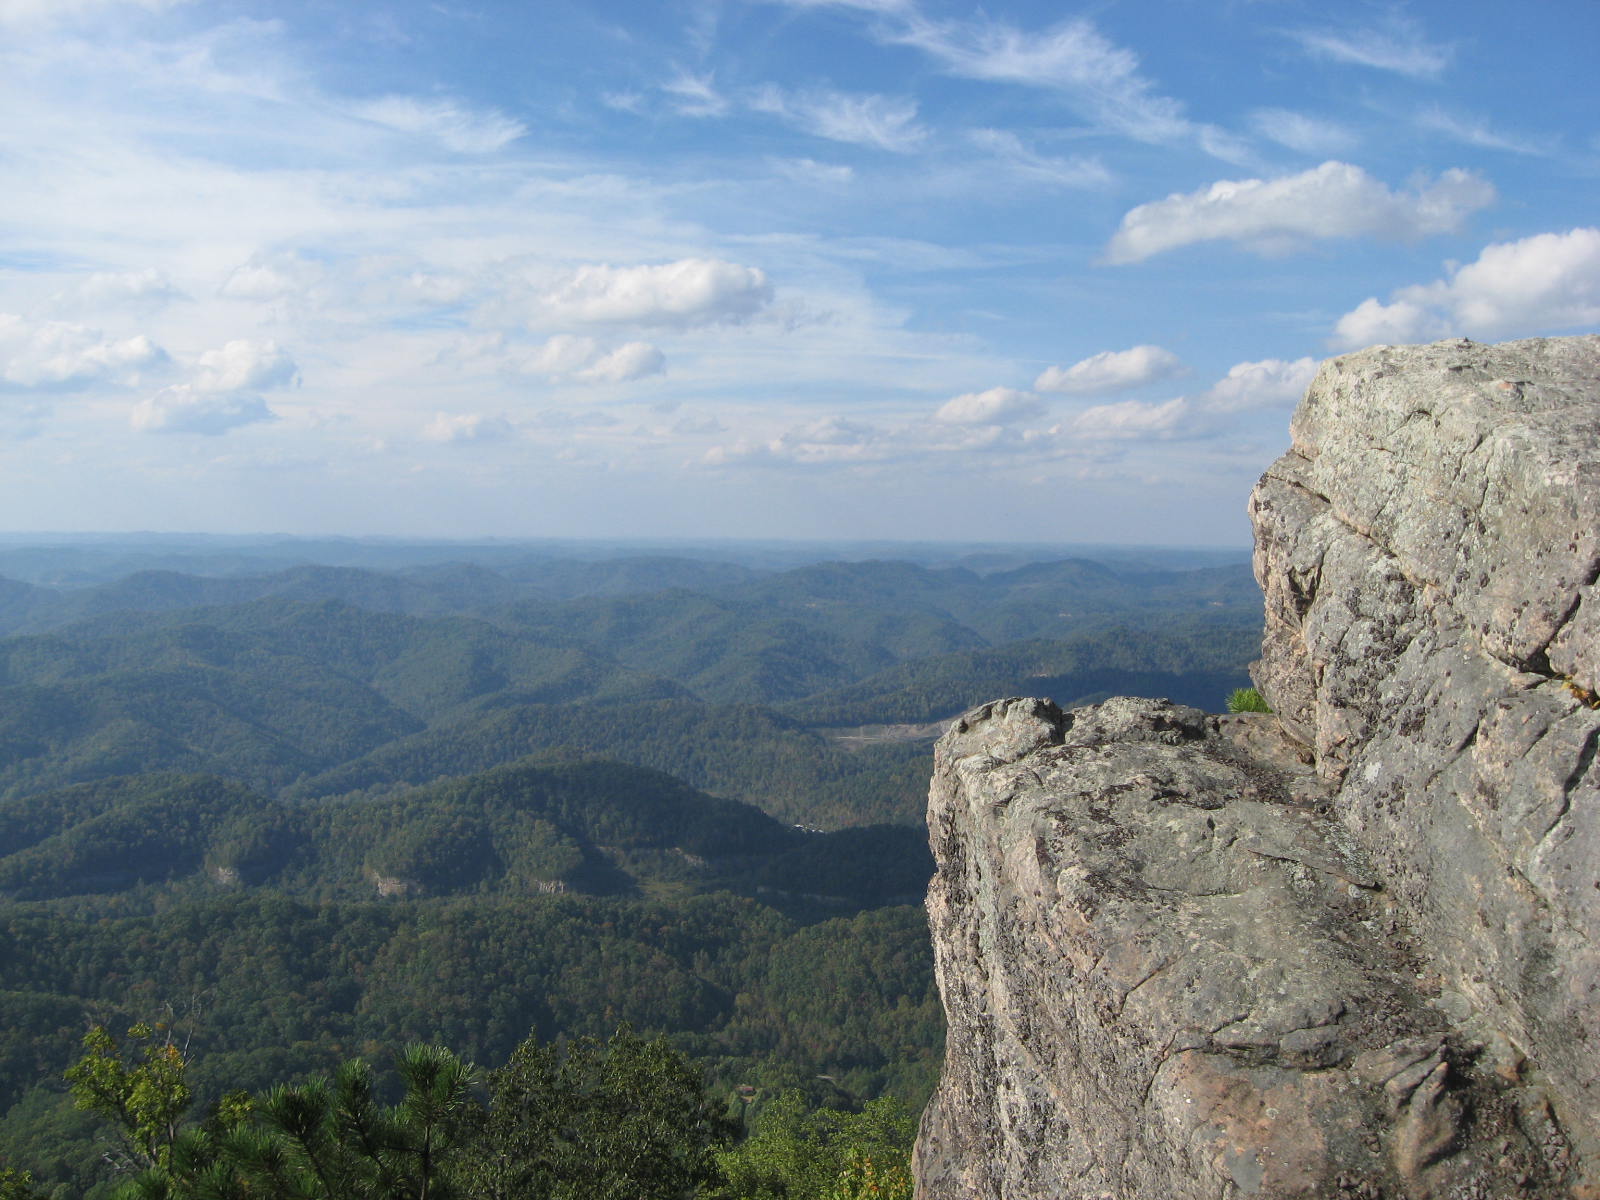 View of Letcher County from the top of Pine Mountain.